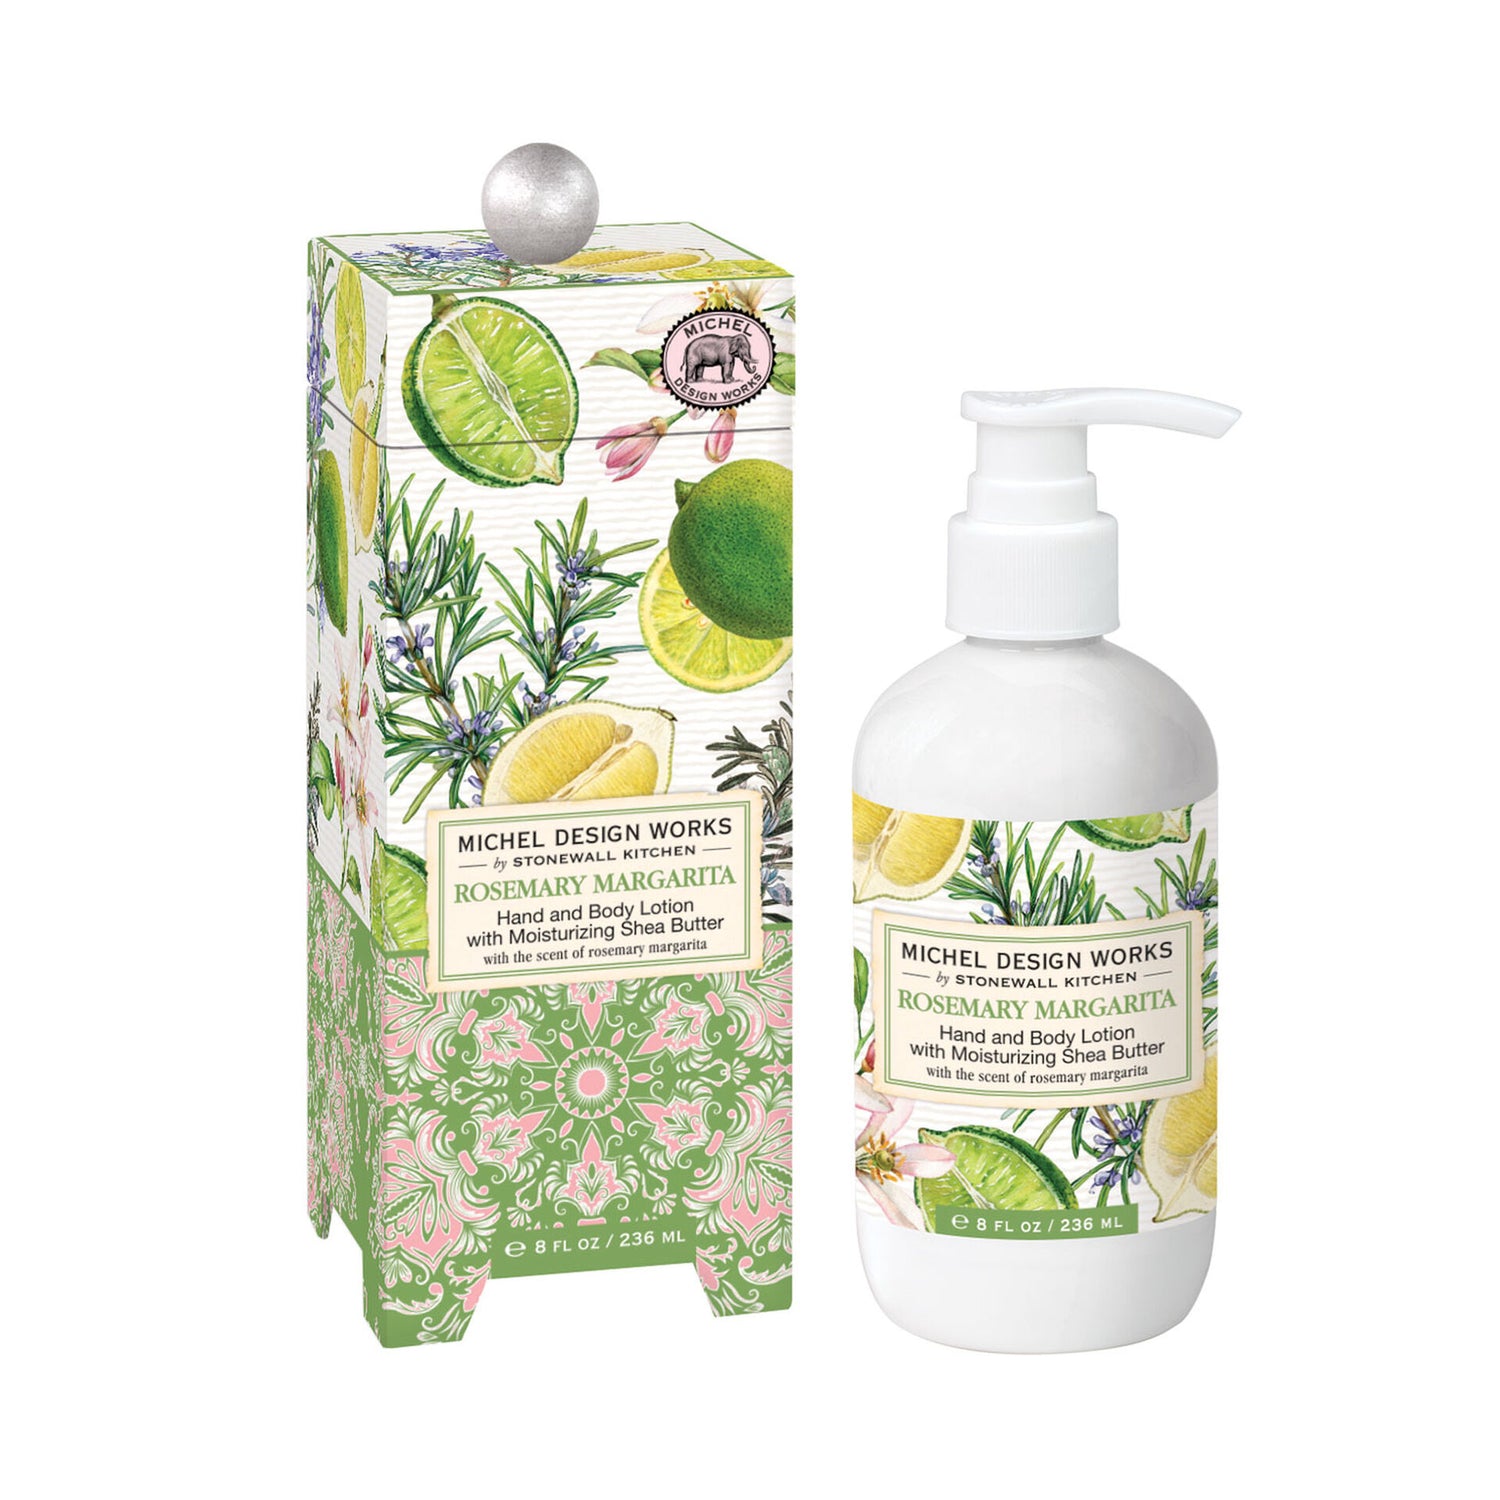 Michel Design Works -Rosemary Margarita (Hand and Body Lotion)